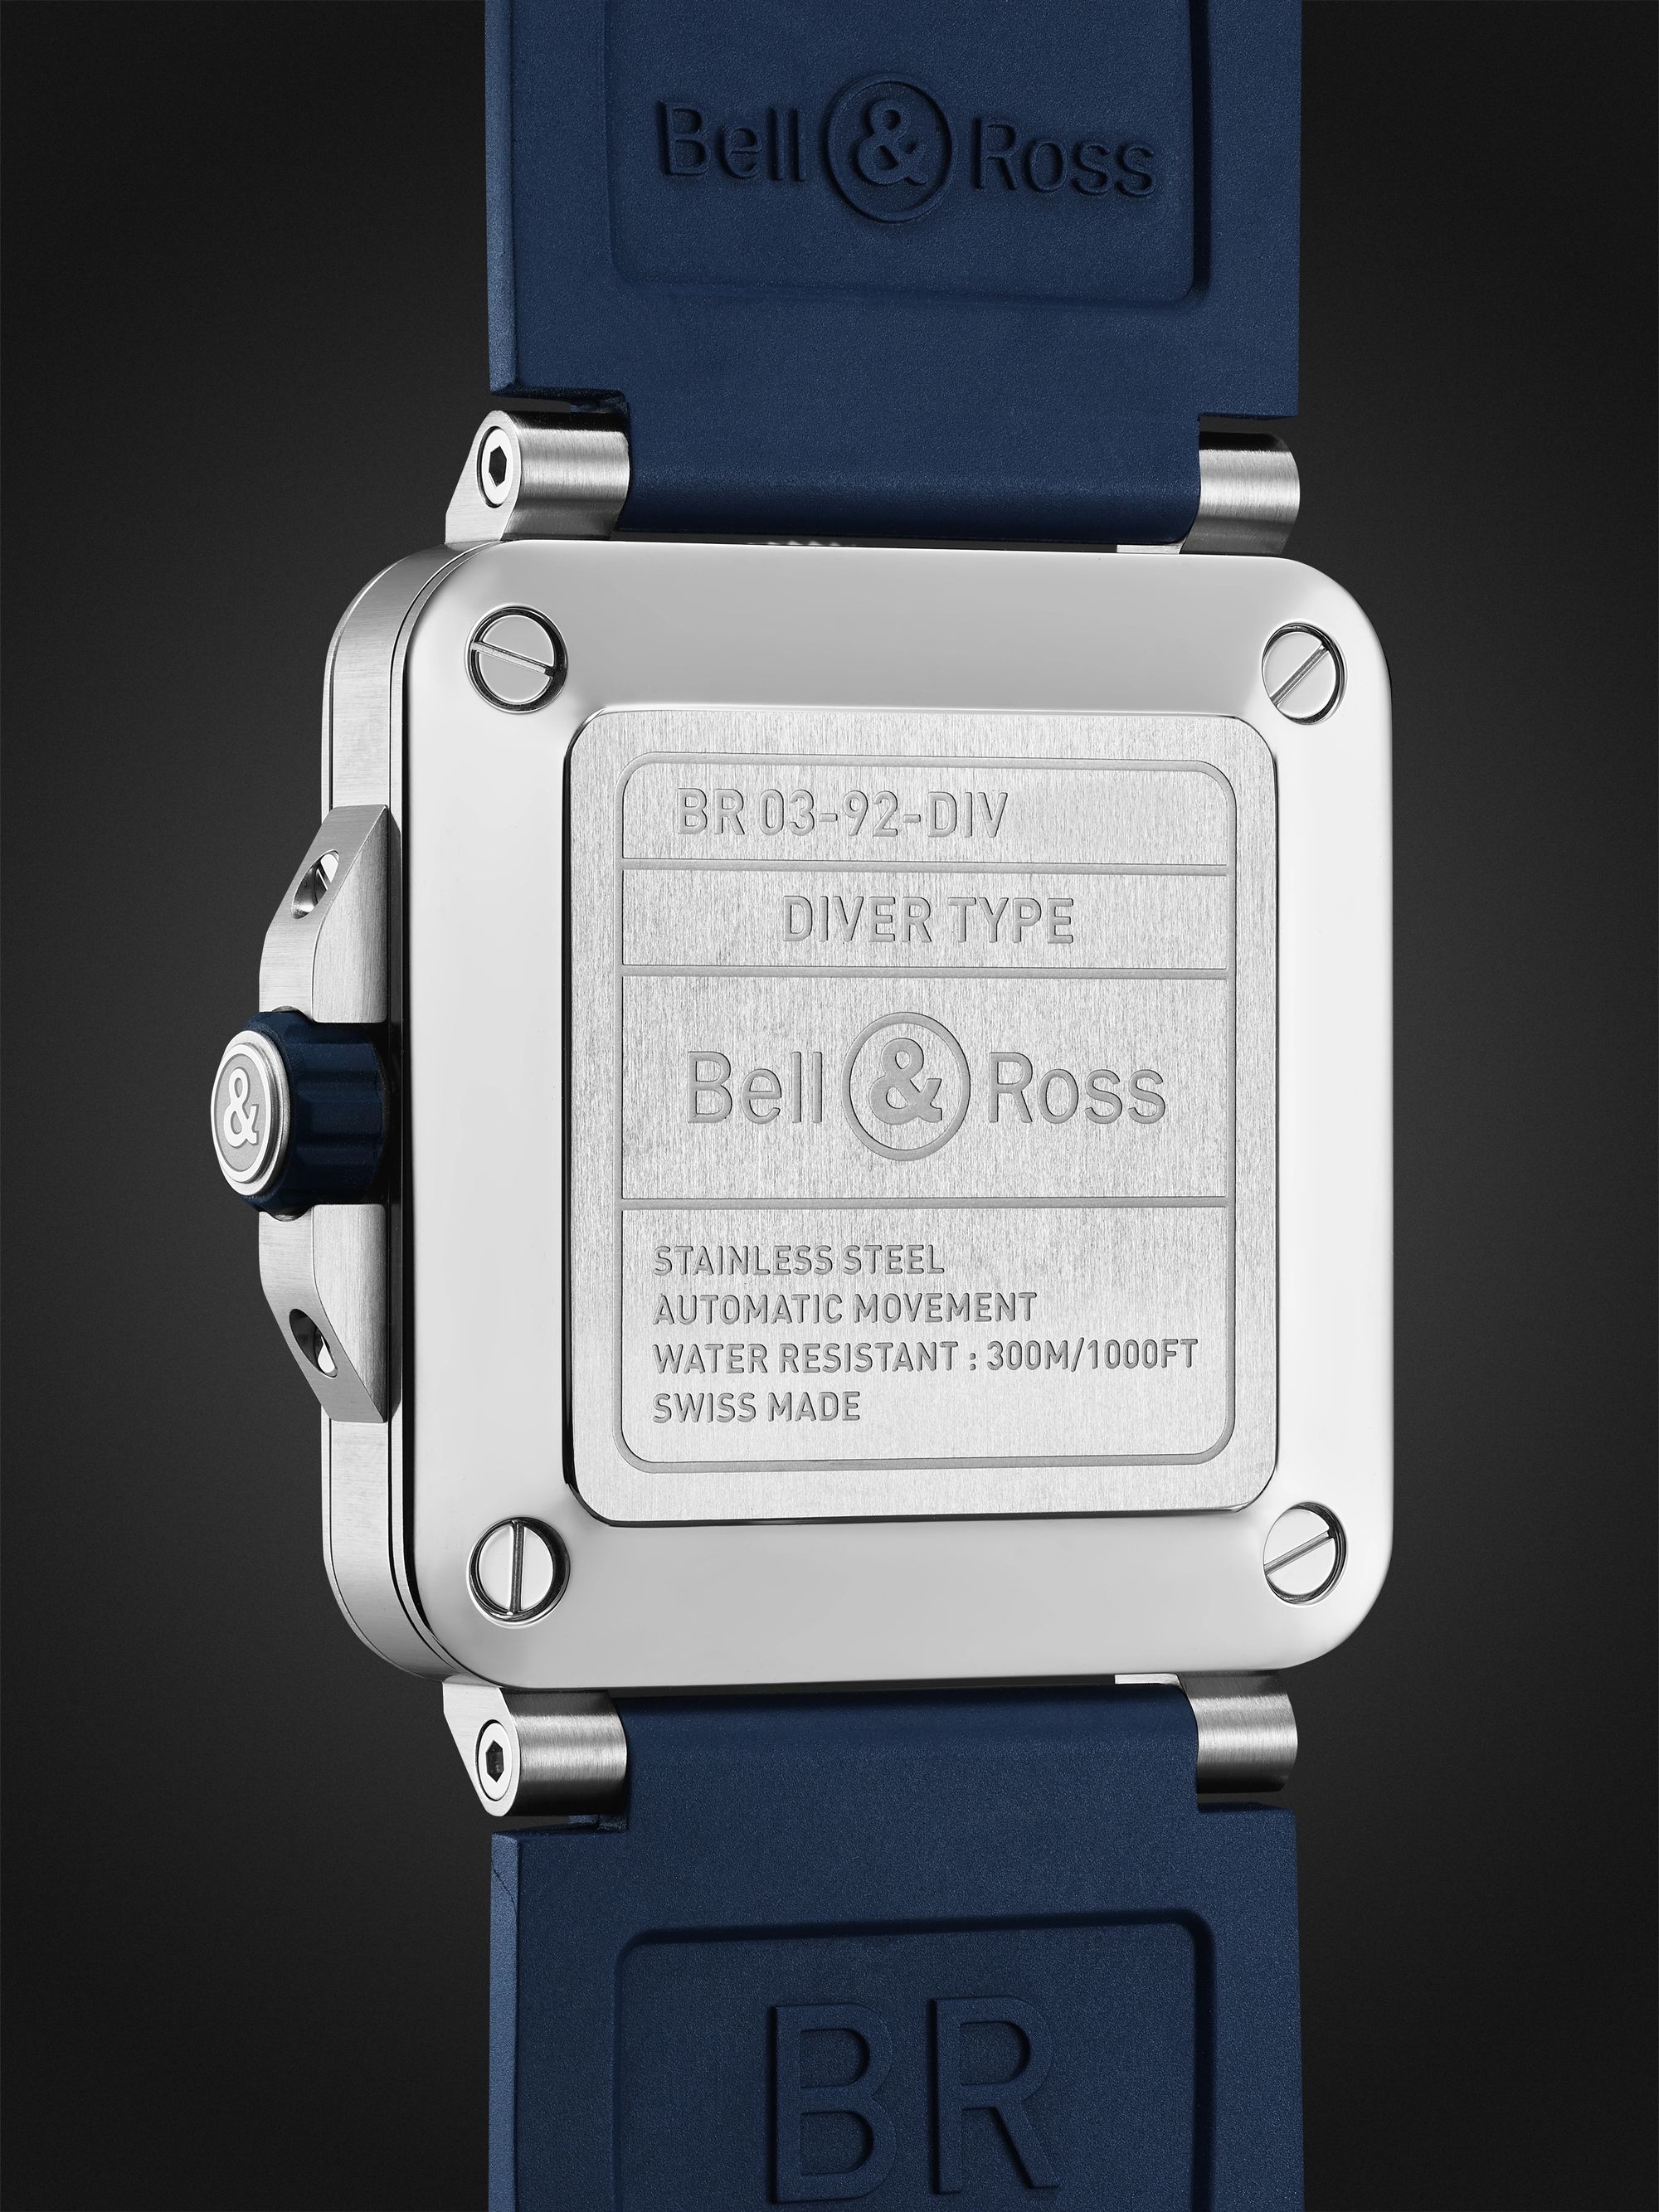 BELL & ROSS BR 03-92 Diver Blue Automatic 42mm Stainless Steel and Rubber Watch, Ref. No. BR0392-D-BU-ST/SRB